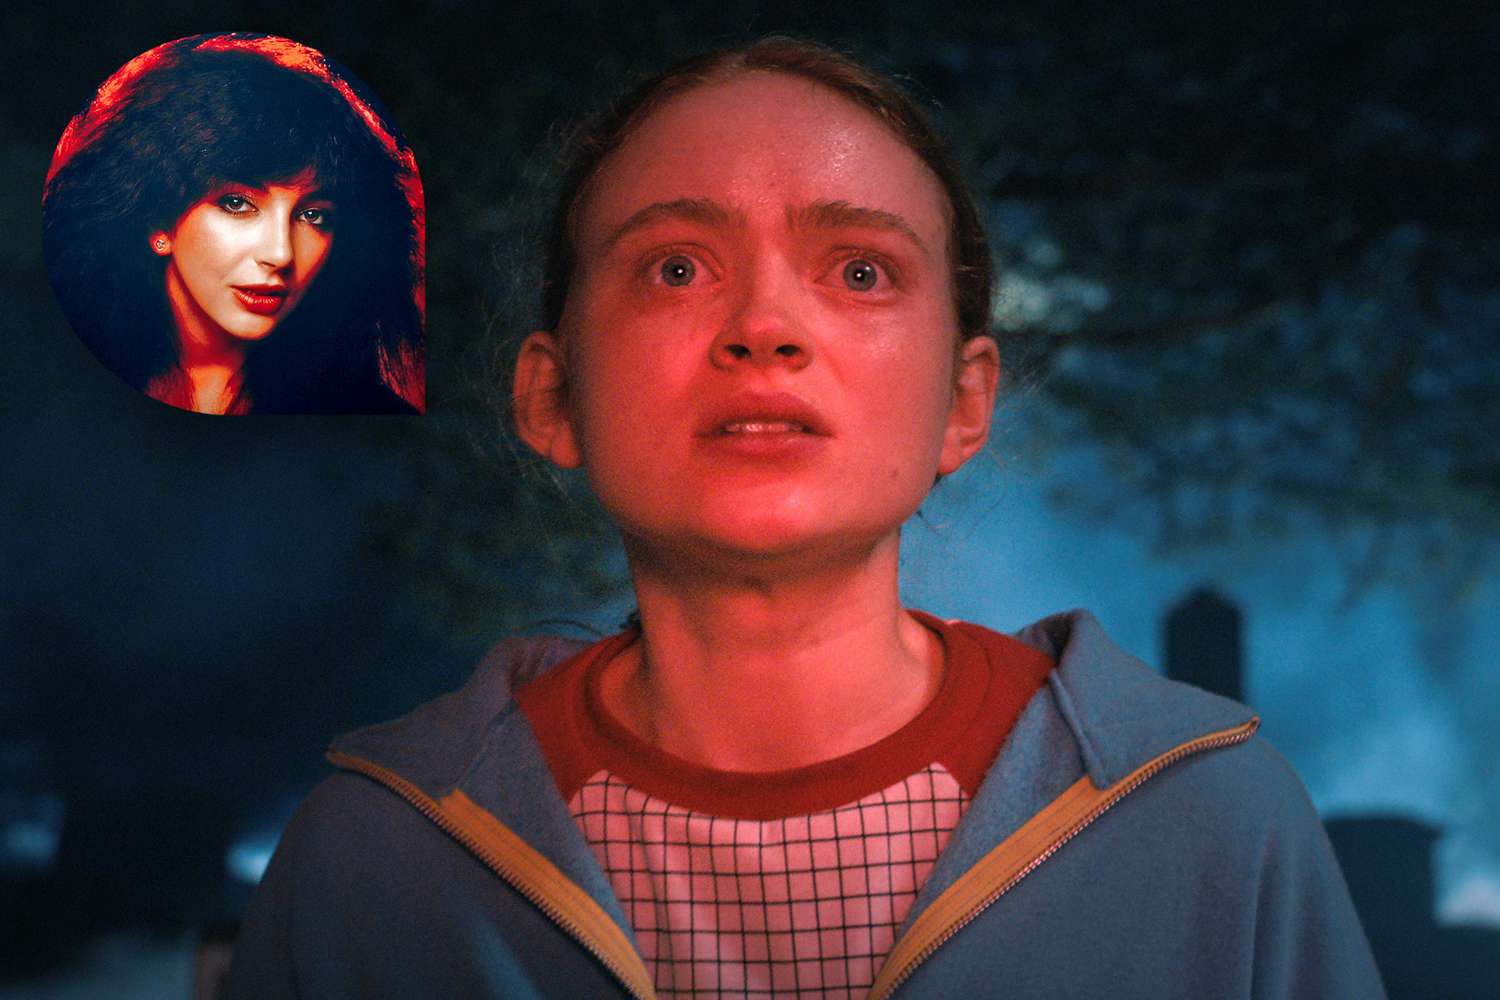 UNSPECIFIED - JANUARY 01: Photo of Kate BUSH (Photo by RB/Redferns); STRANGER THINGS. Sadie Sink as Max Mayfield in STRANGER THINGS. Cr. Courtesy of Netflix © 2022